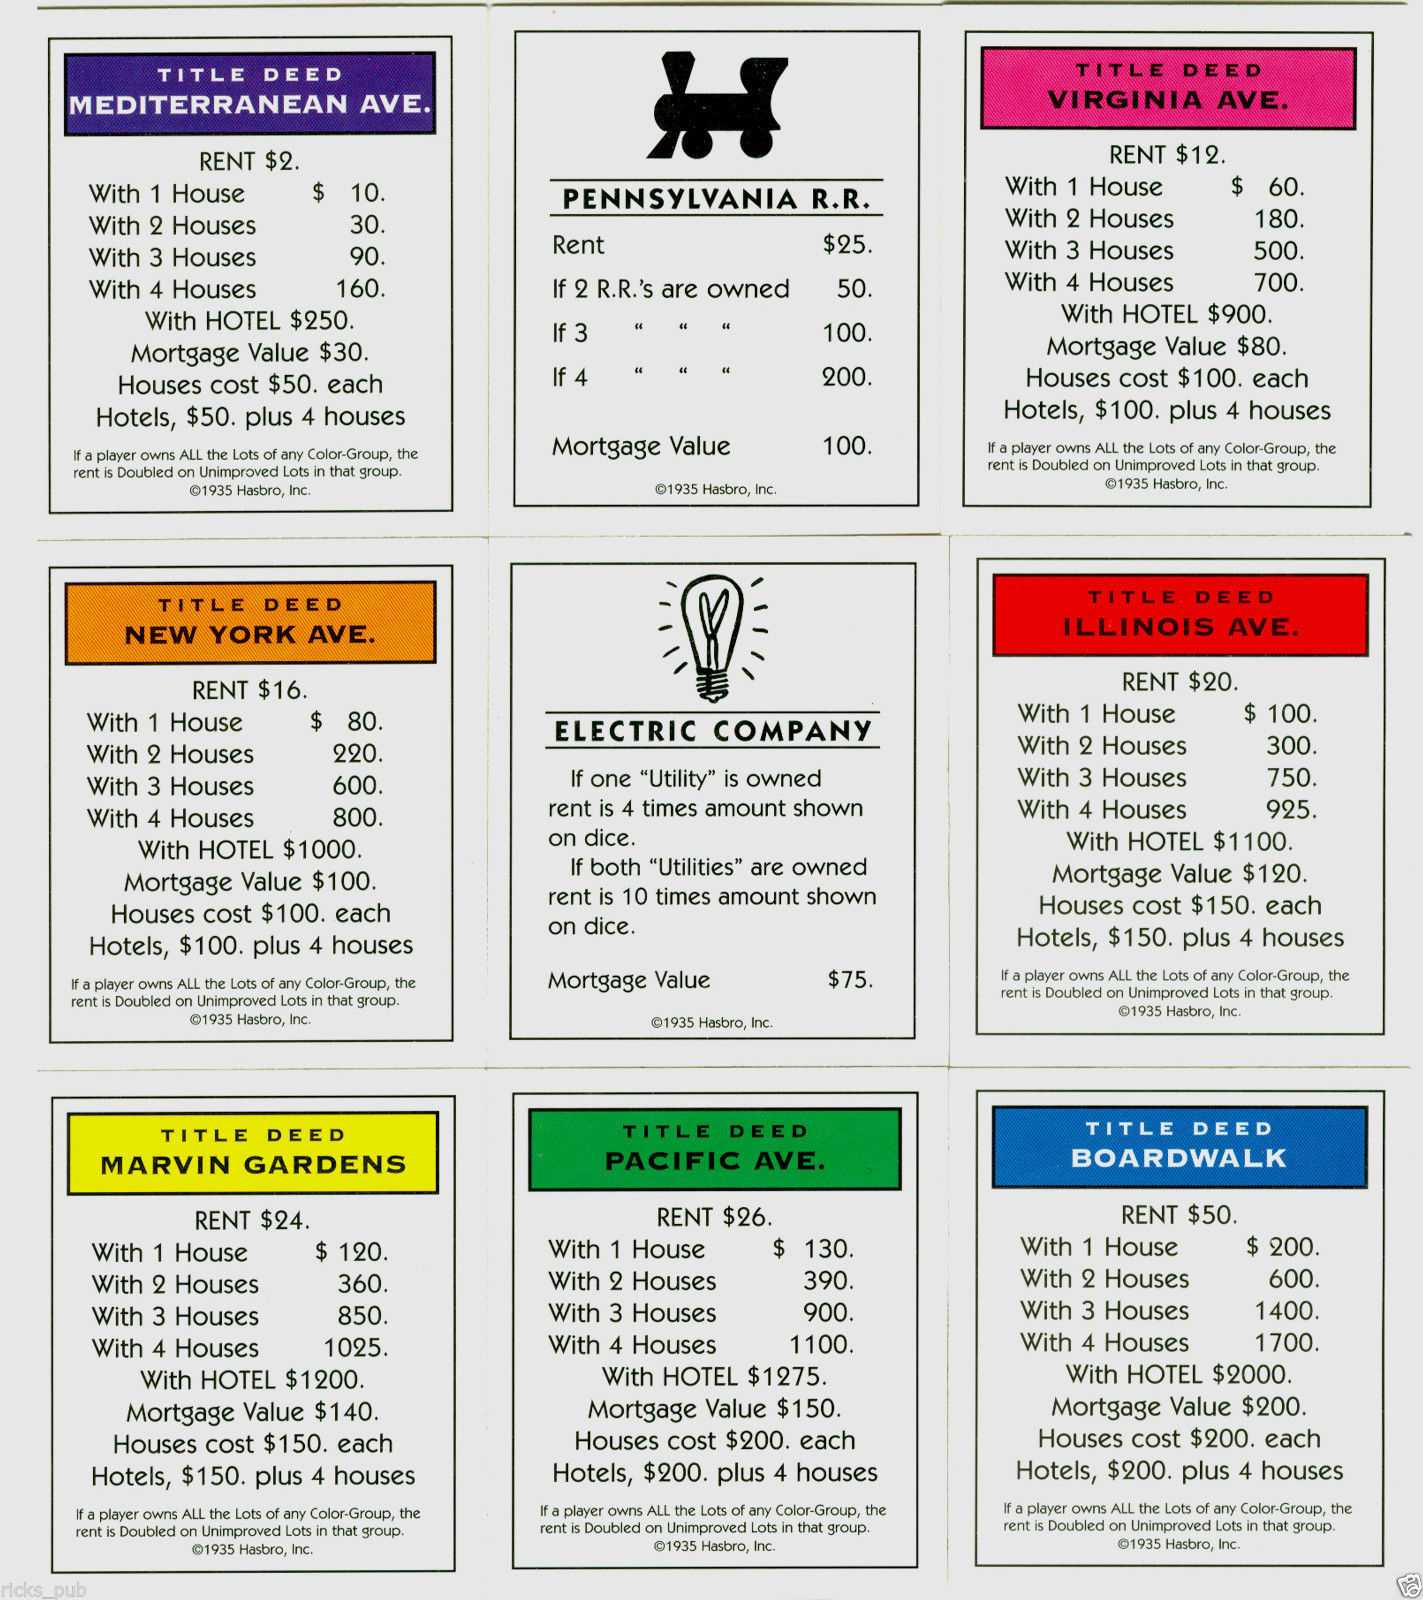 1C1 Monopoly Chance Card Template | Wiring Library In Monopoly Chance Cards Template